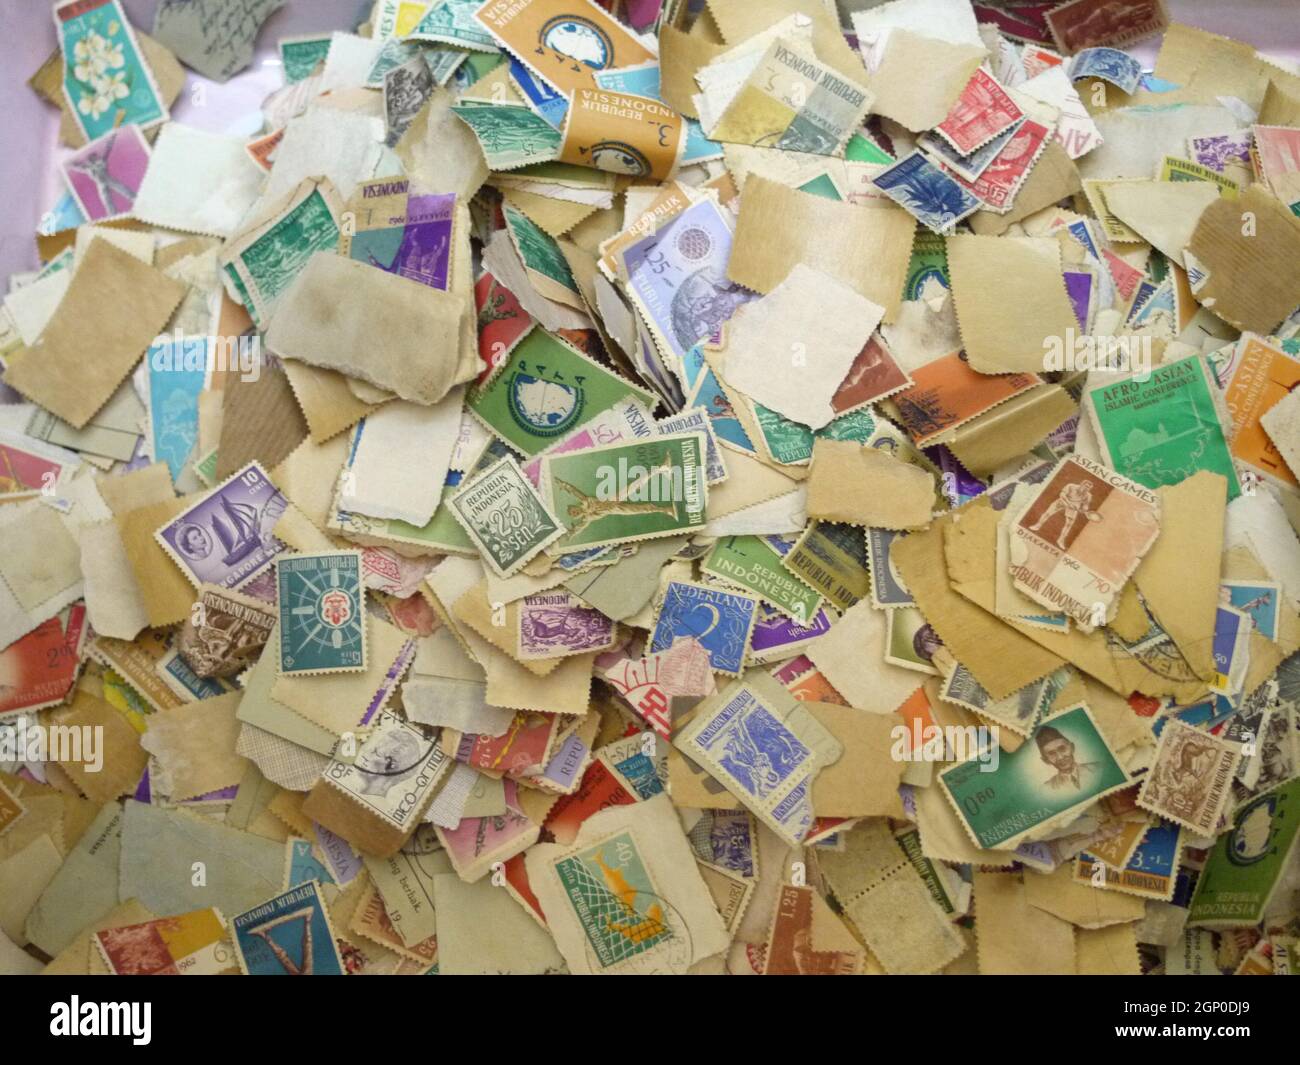 photos of used stamps that are often targeted for collection by philatelists Stock Photo